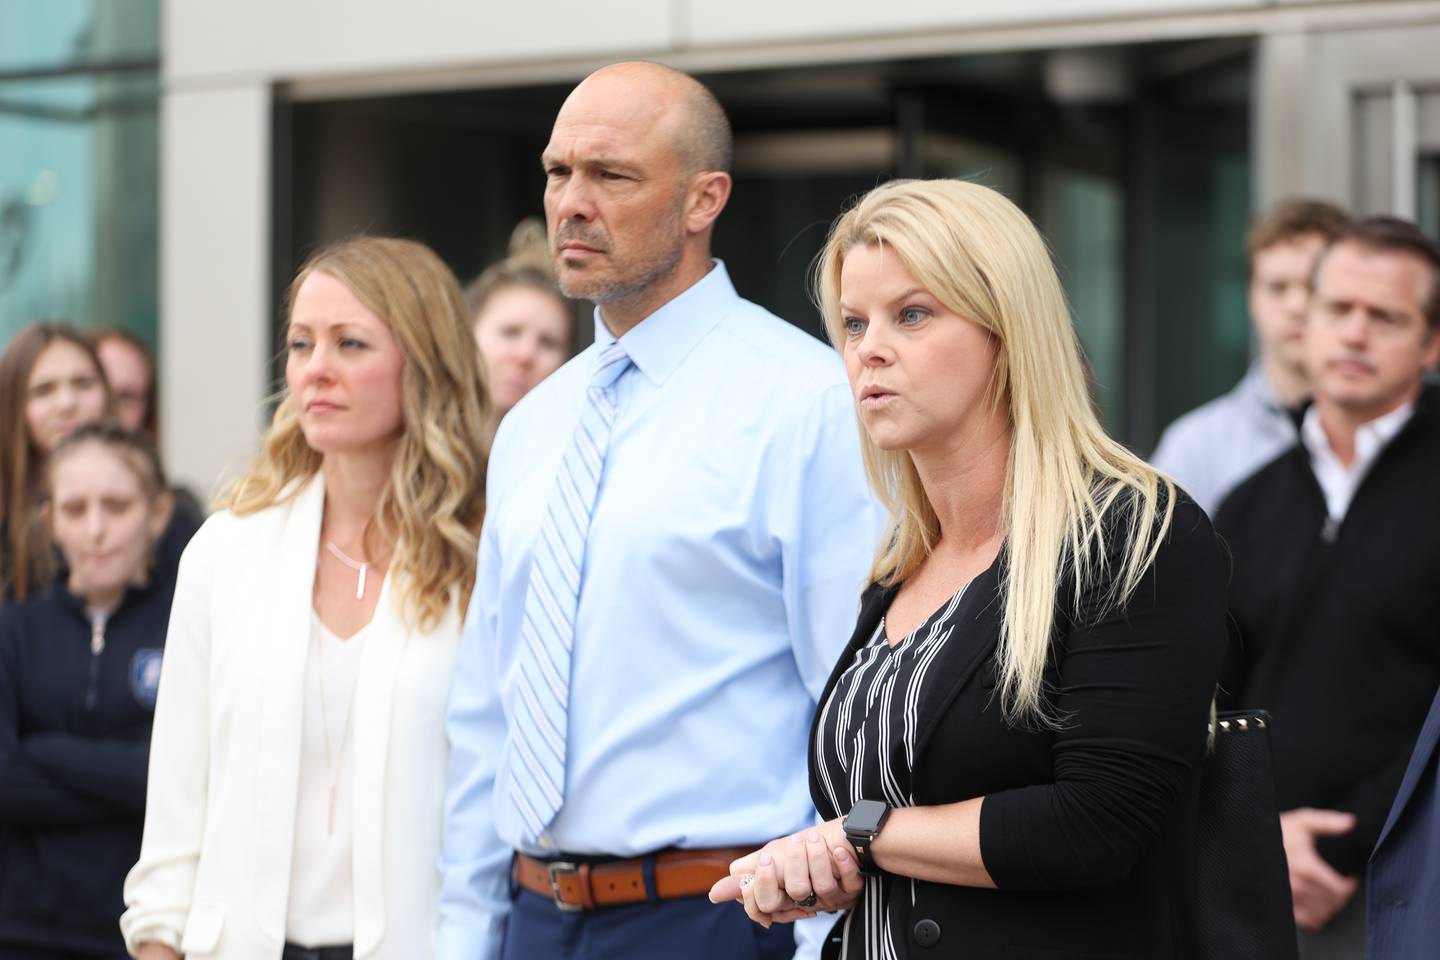 Stacie Mroz, right, a friend of the Goewey family speaks to the press outside Will County Courthouse during a press conference. Edward Goewey, a Will County sheriff’s deputy currently on medical leave, is being charged with disorderly conduct accusing him of disturbing Mokena school officials when he insisted on the removal of a student he believed made a shooting threat at St. Mary Catholic school. Monday, April 11, 2022, in Joliet.